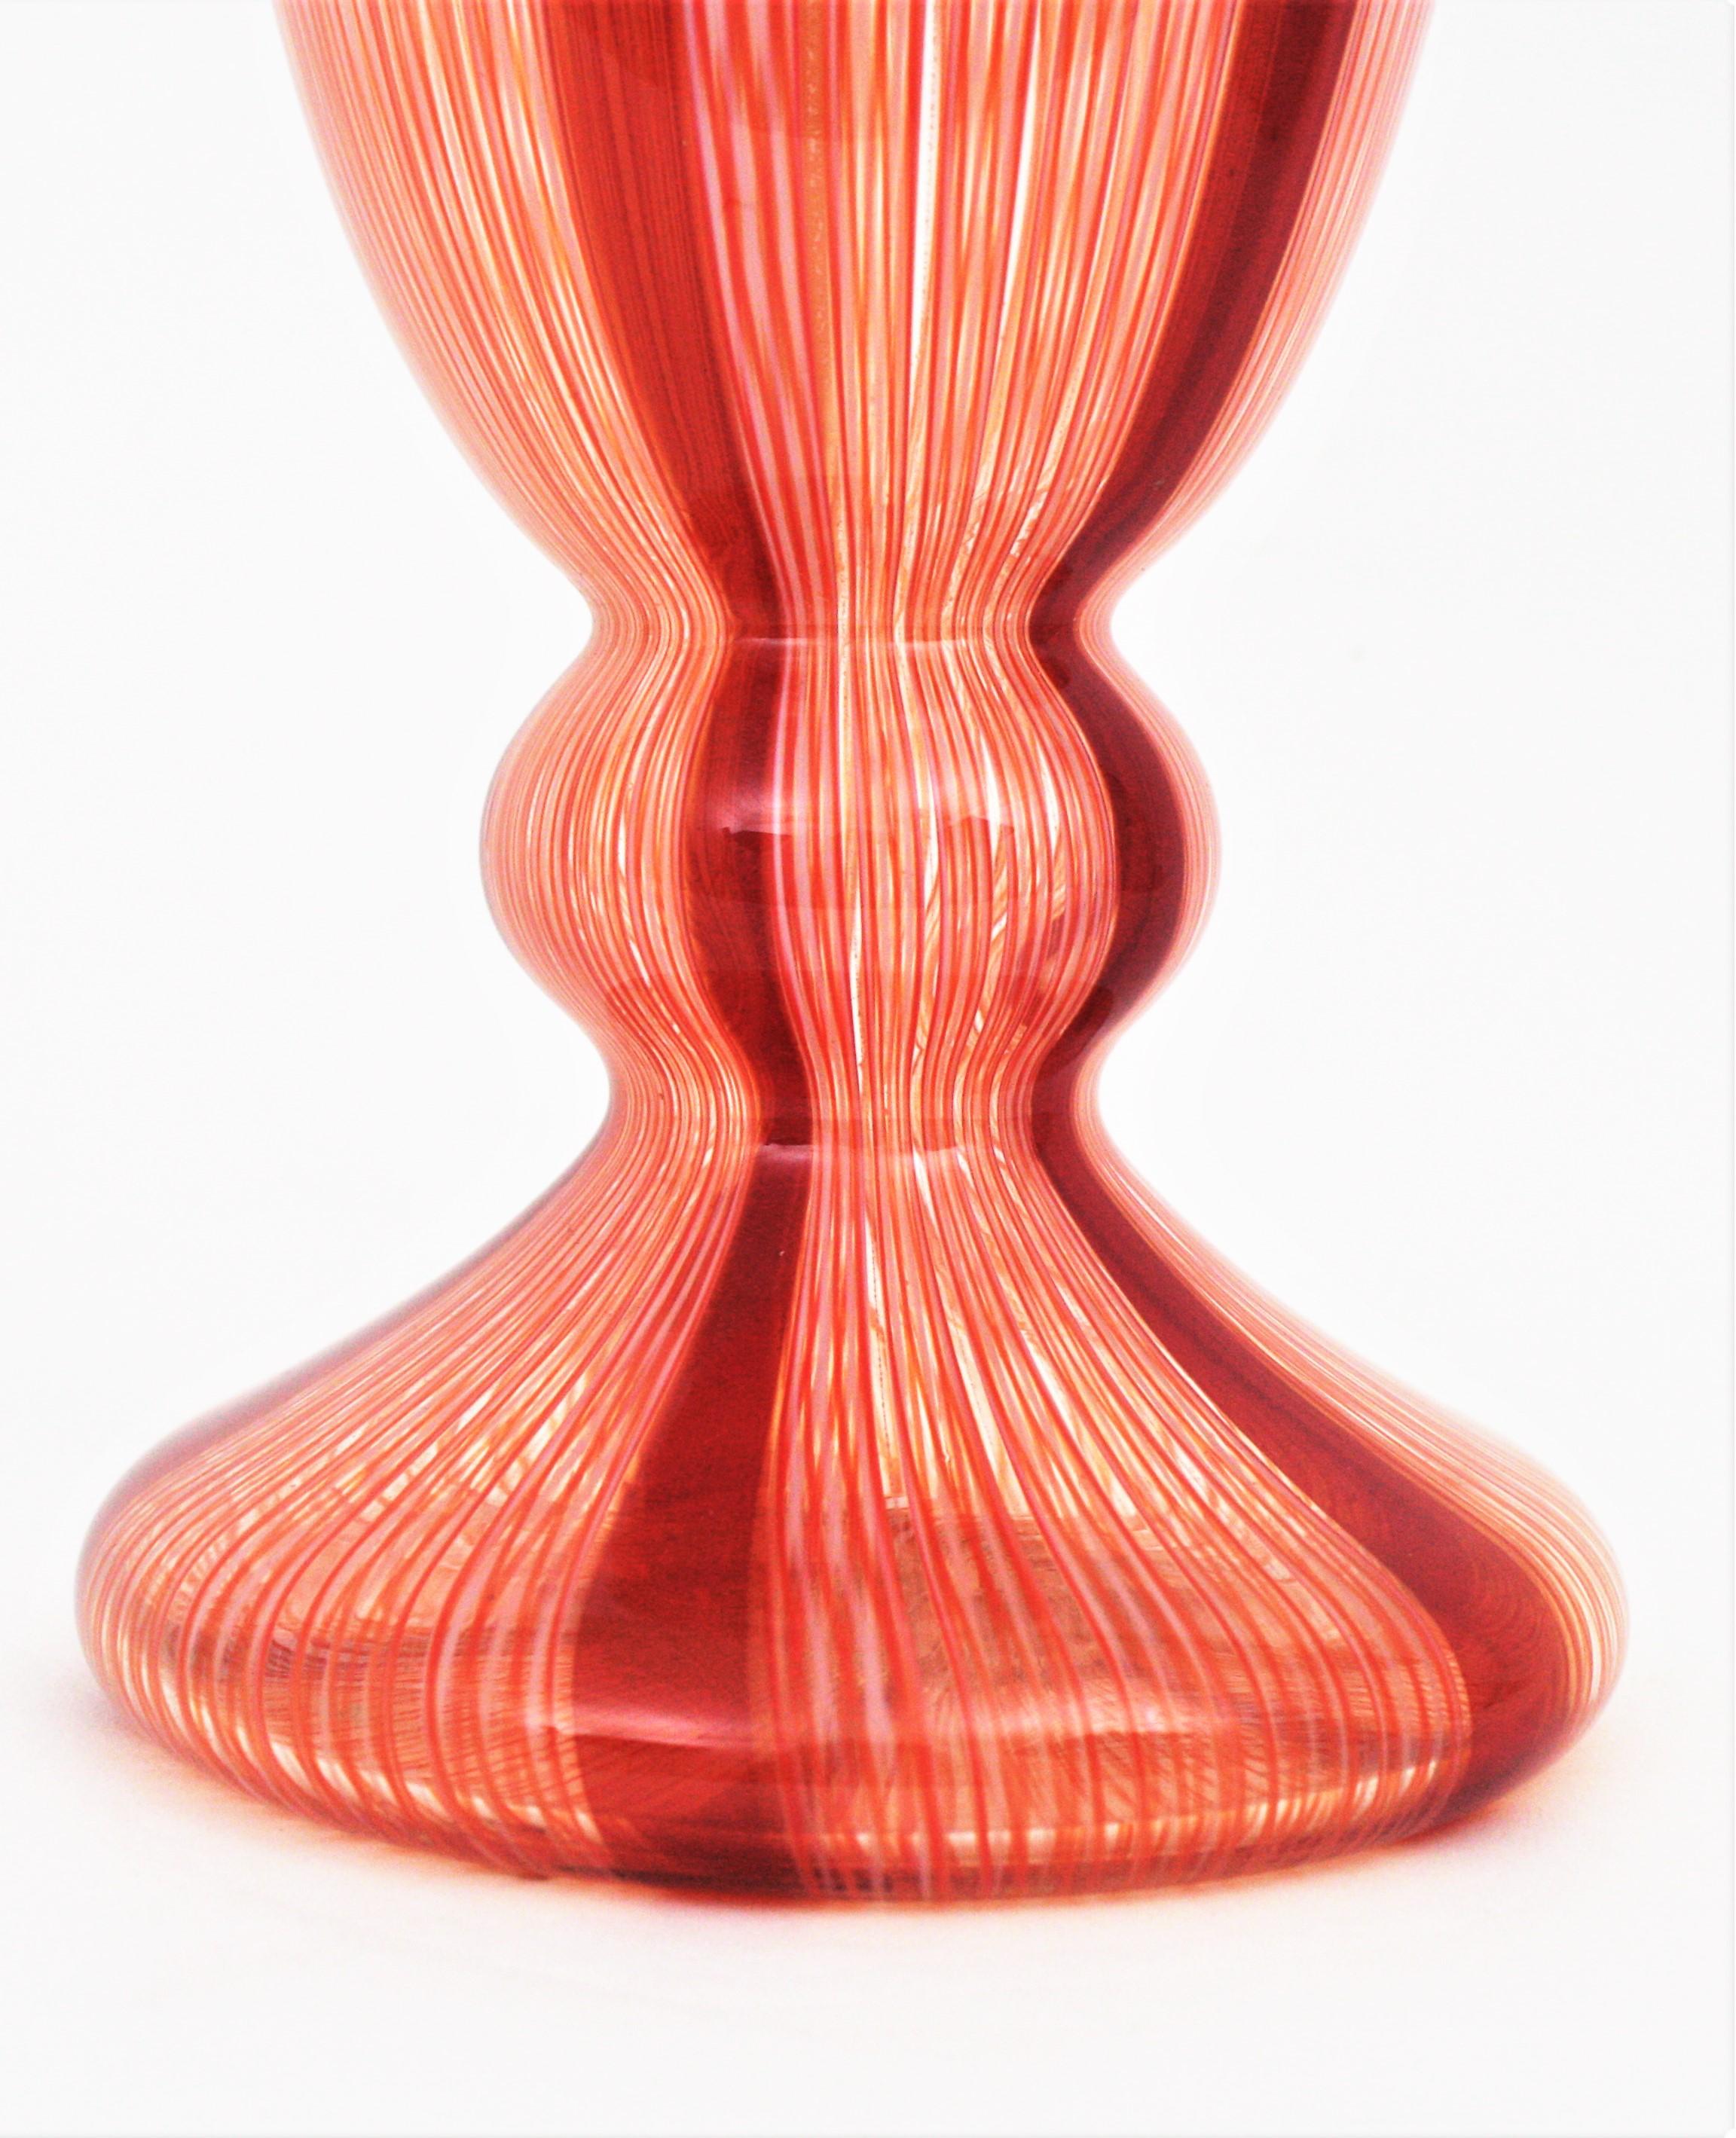 Fratelli Toso Murano Red and White Ribbons Large Art Glass Vase For Sale 3